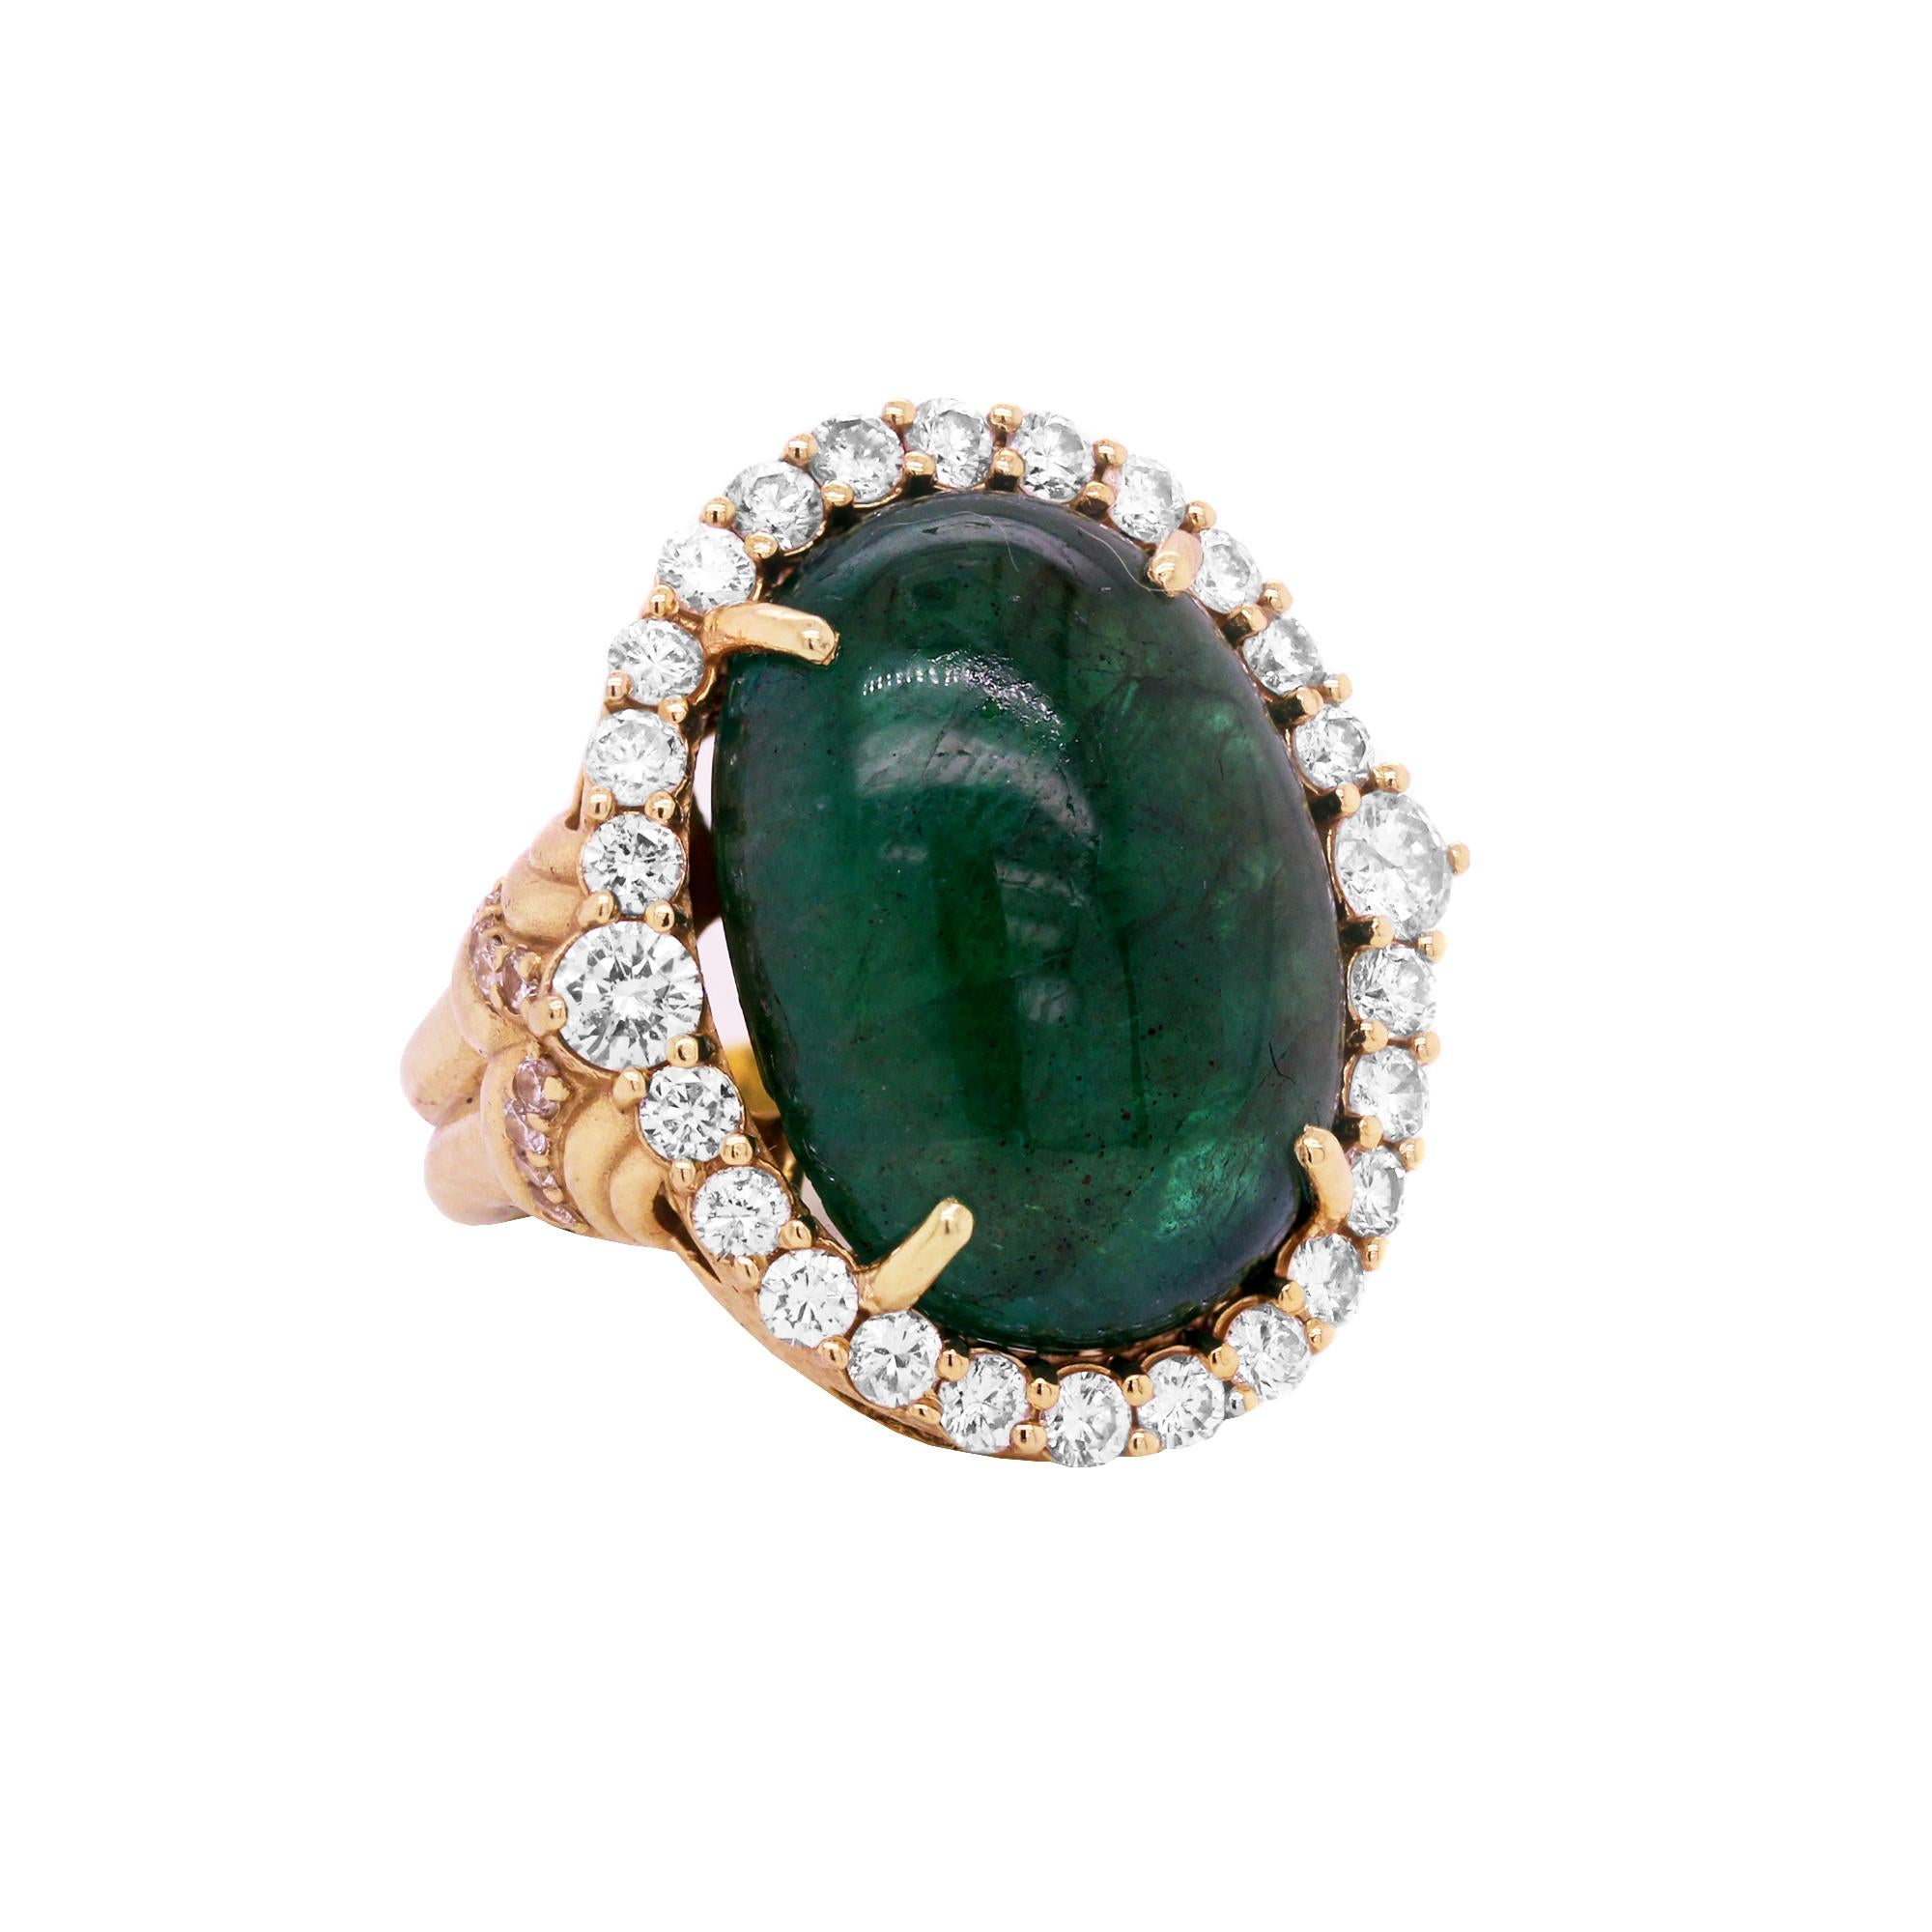 33 Carat Cabochon Oval Colombian Emerald 18K Yellow Gold Diamond Cocktail Ring

Incredible Emerald with exceptional color. Oval cabochon cut, apprx. 33 carat total weight

2.50 carat G-F color, VS clarity white diamonds total weight

Ring is